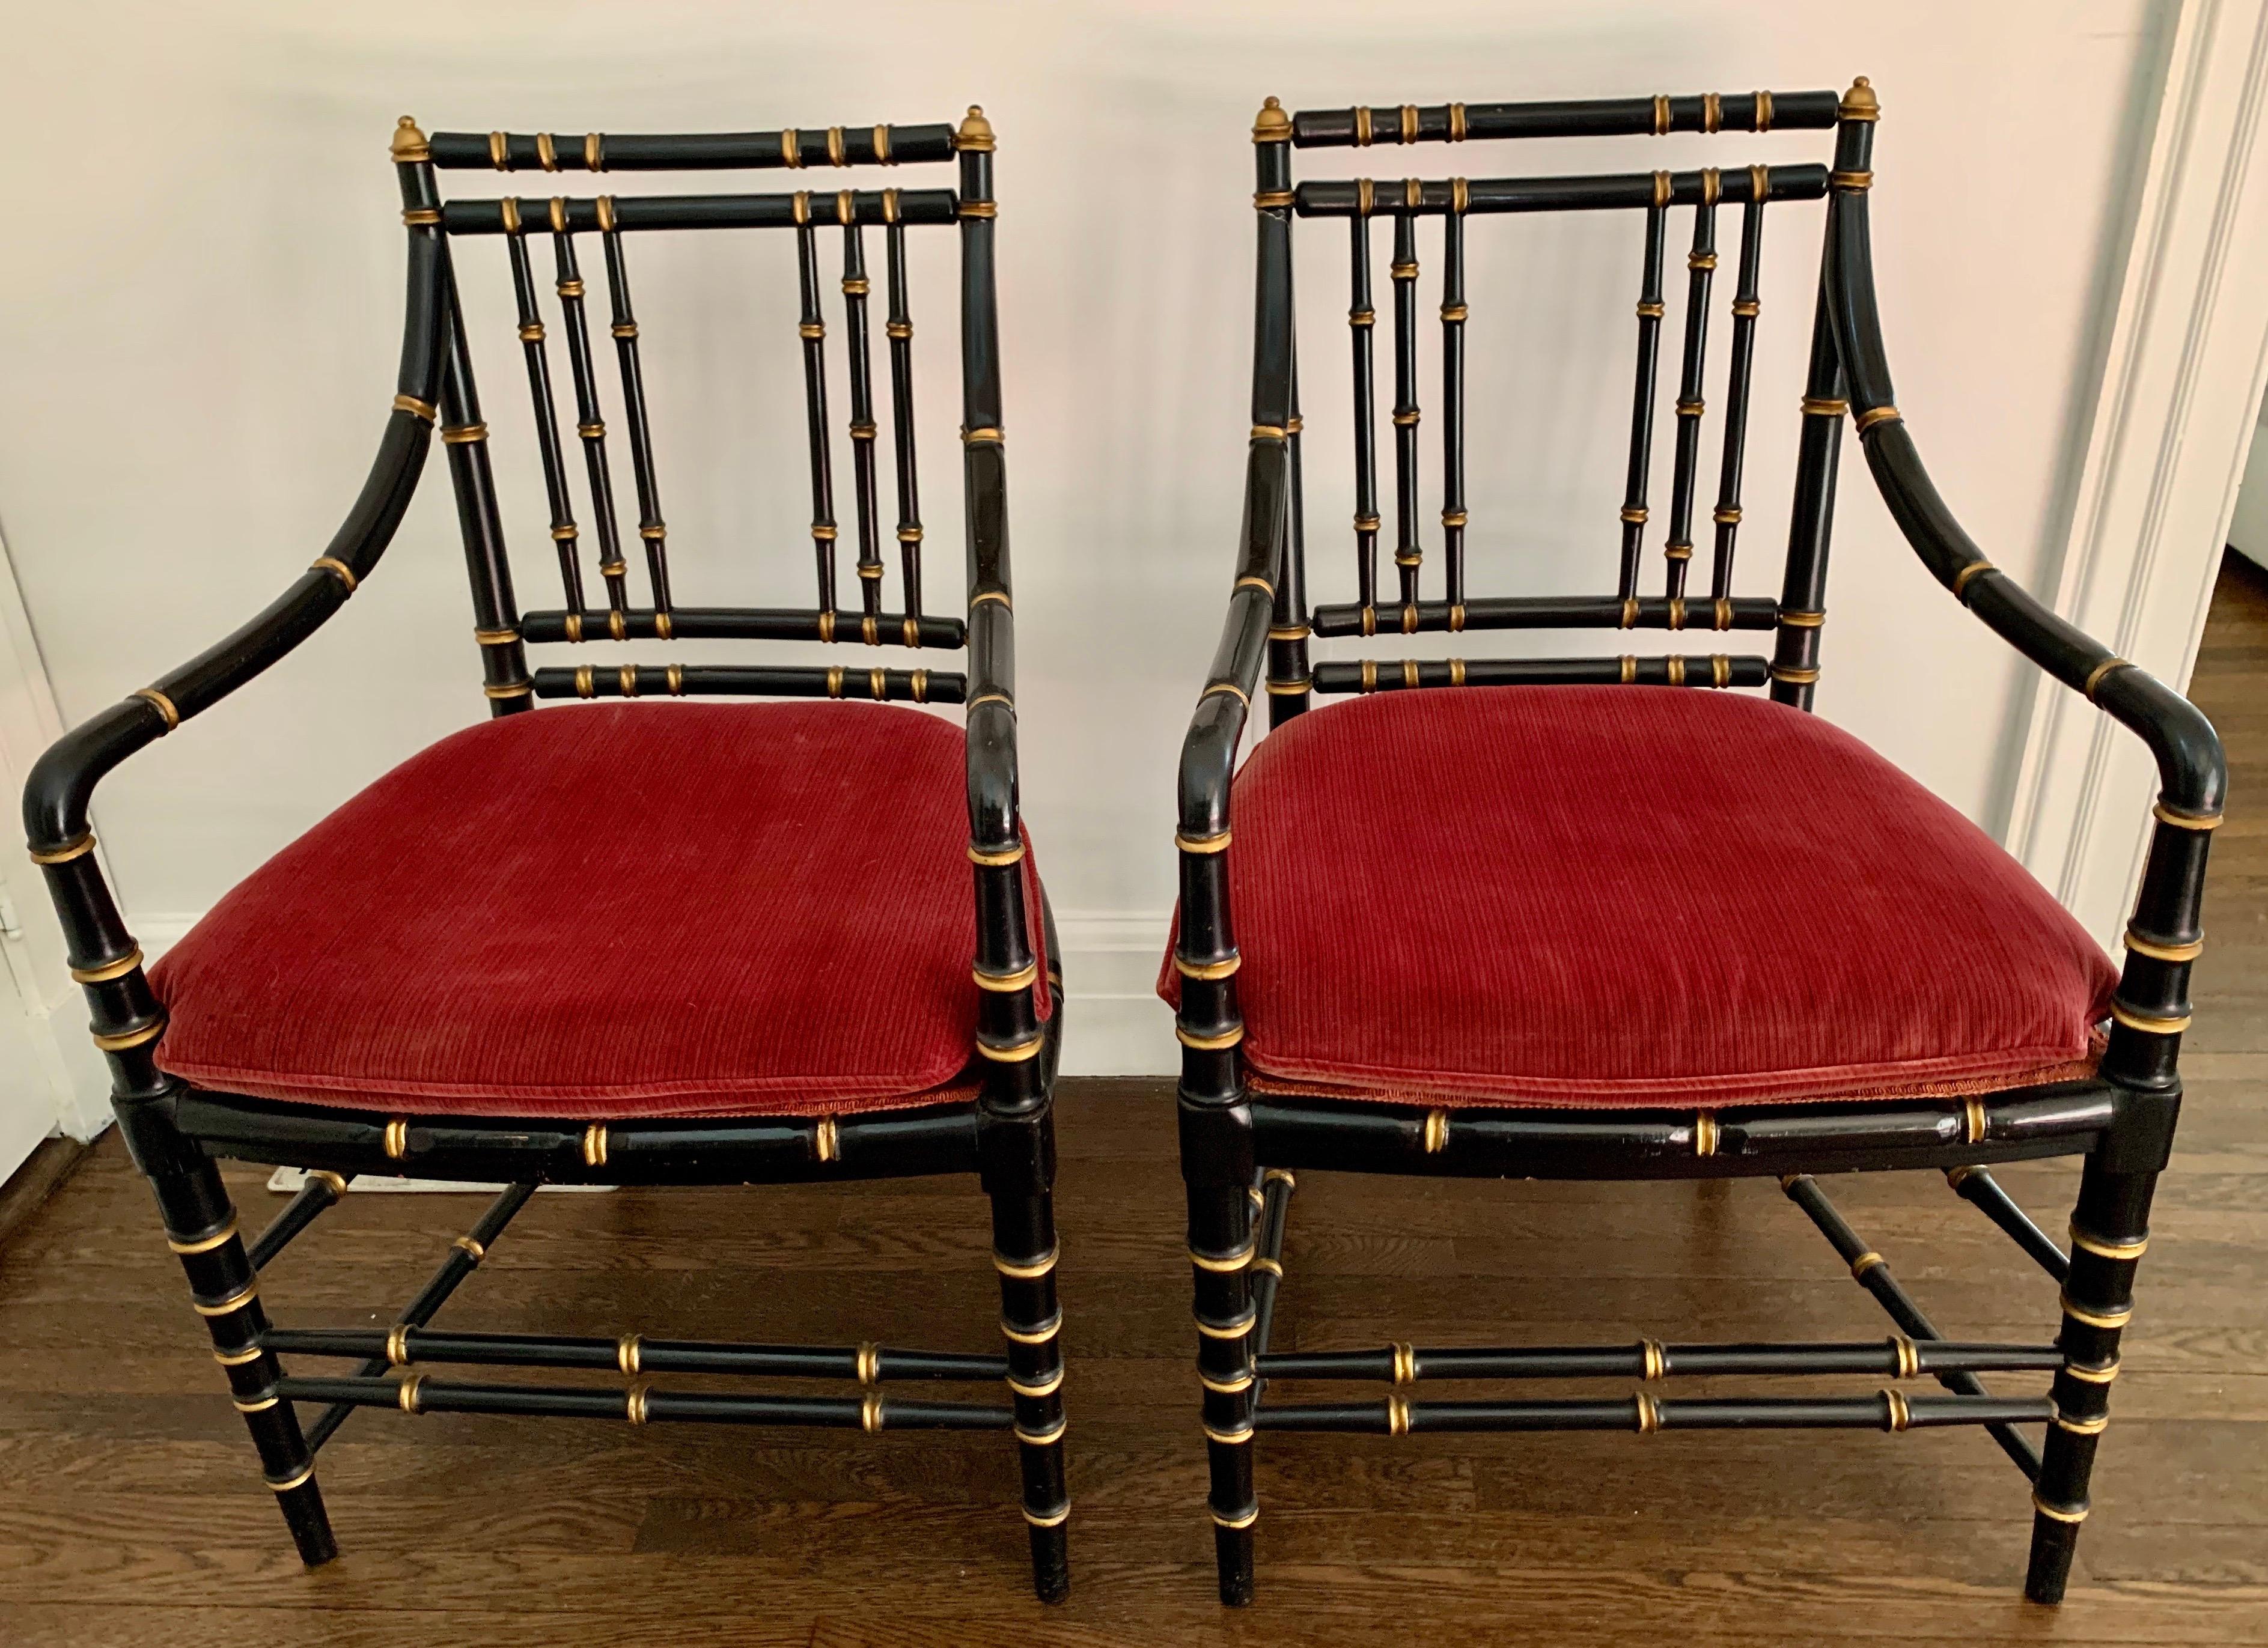 Pair of Chinese Chippendale faux bamboo black armchairs with gold gilt detail and beautiful red velvet seat cushions.